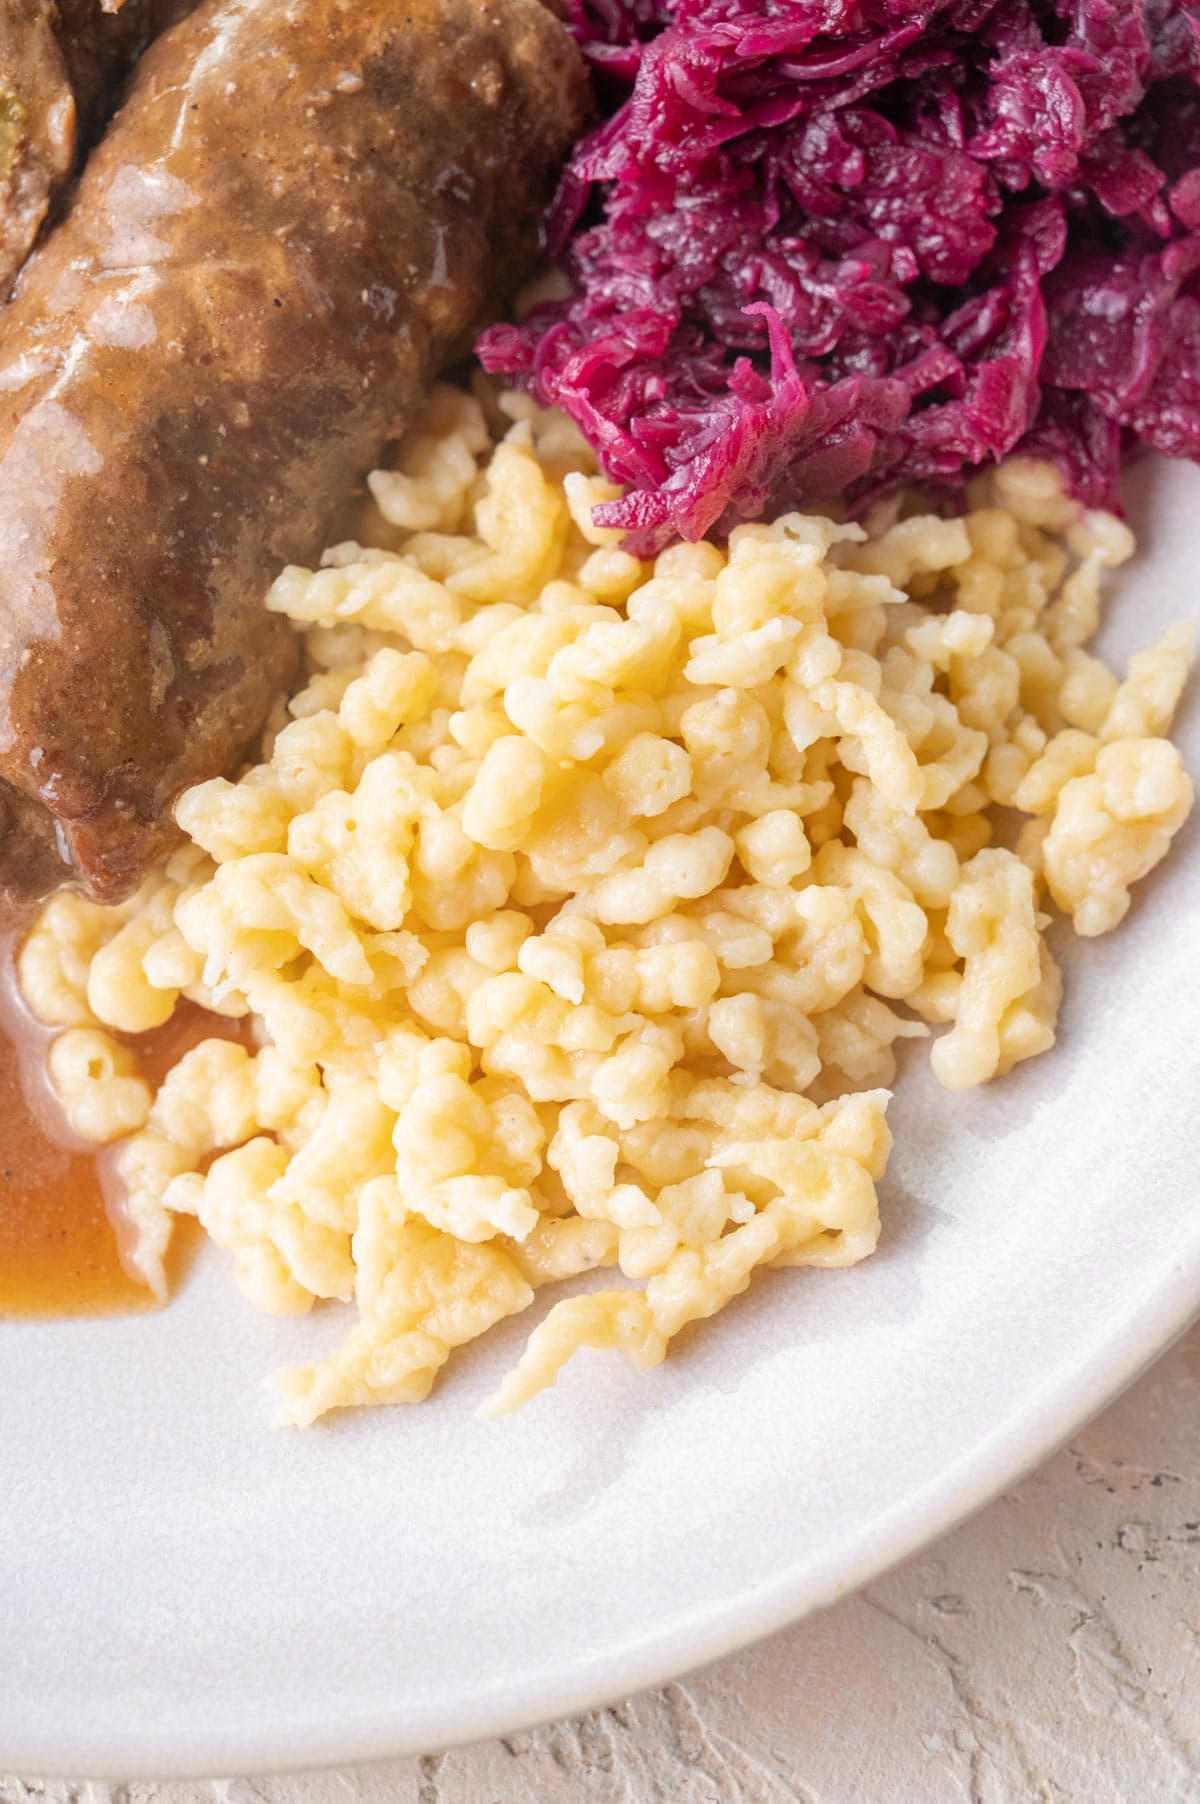 Spätzle on a plate with red cabbage and Rouladen.